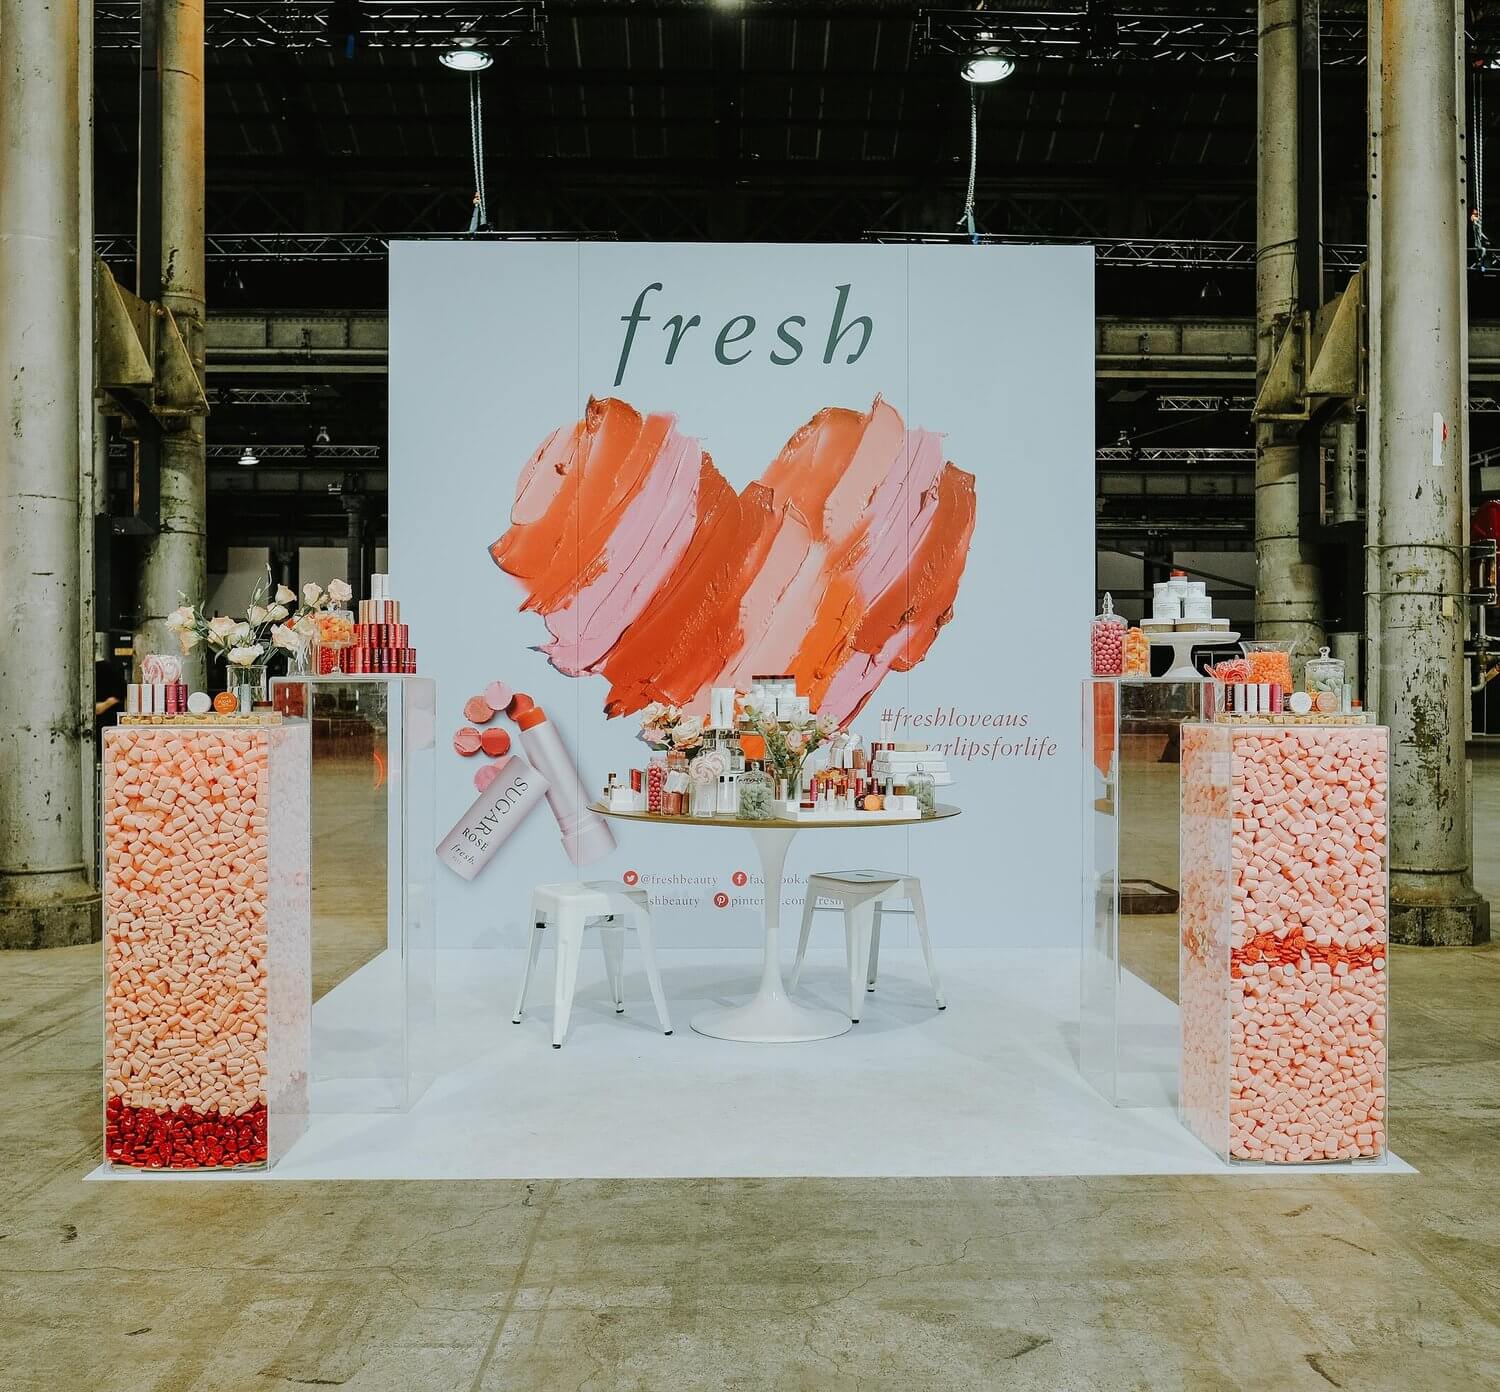 A large Sephora display promoting their lipstick with chairs and products surrounding it, with the text "fresh" in the background.